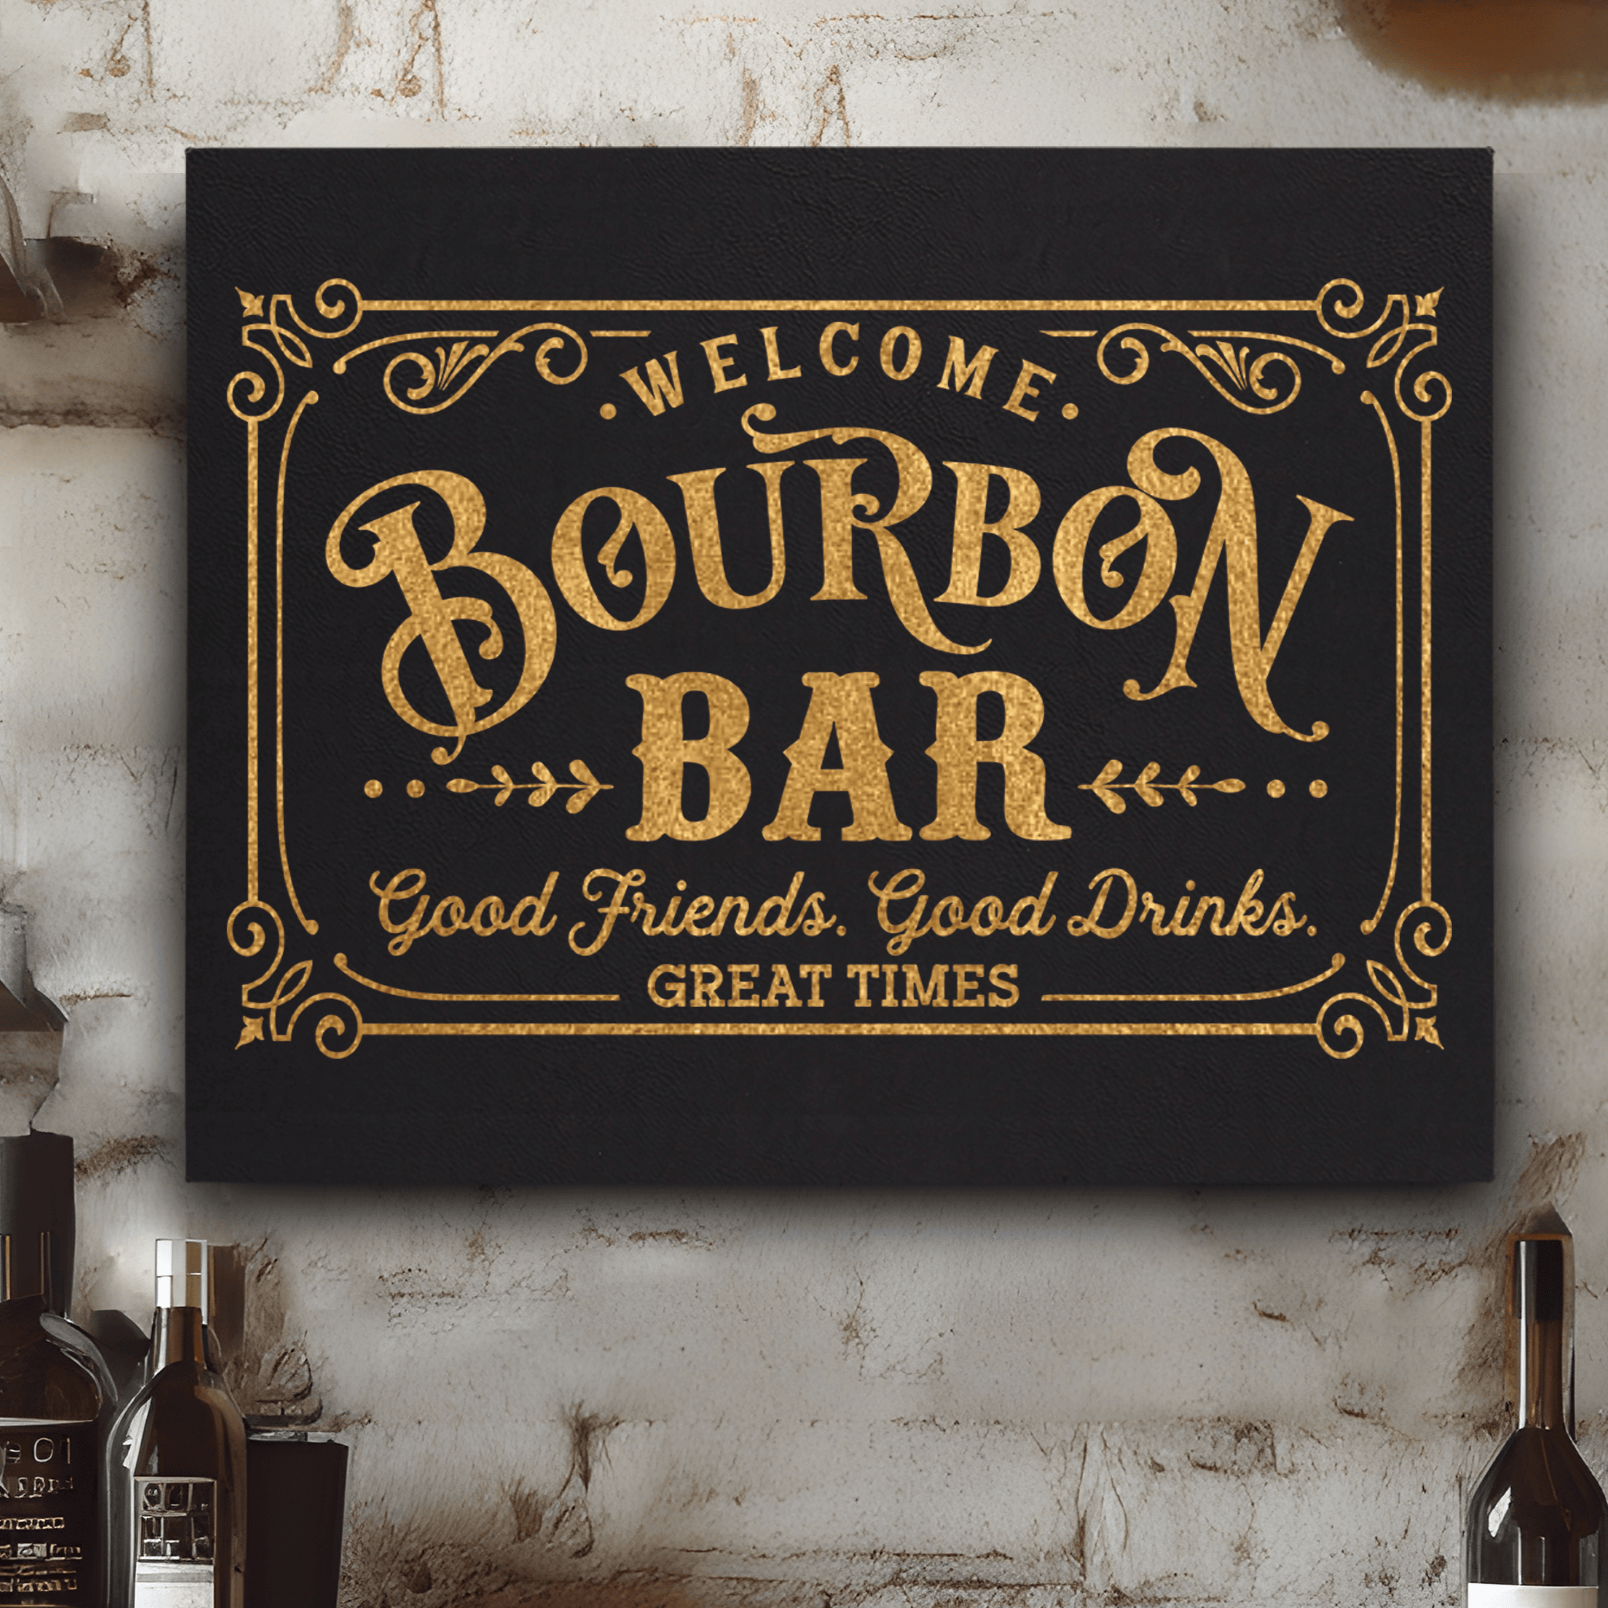 Black Gold Leather Wall Decor With Bourbon Bar Design